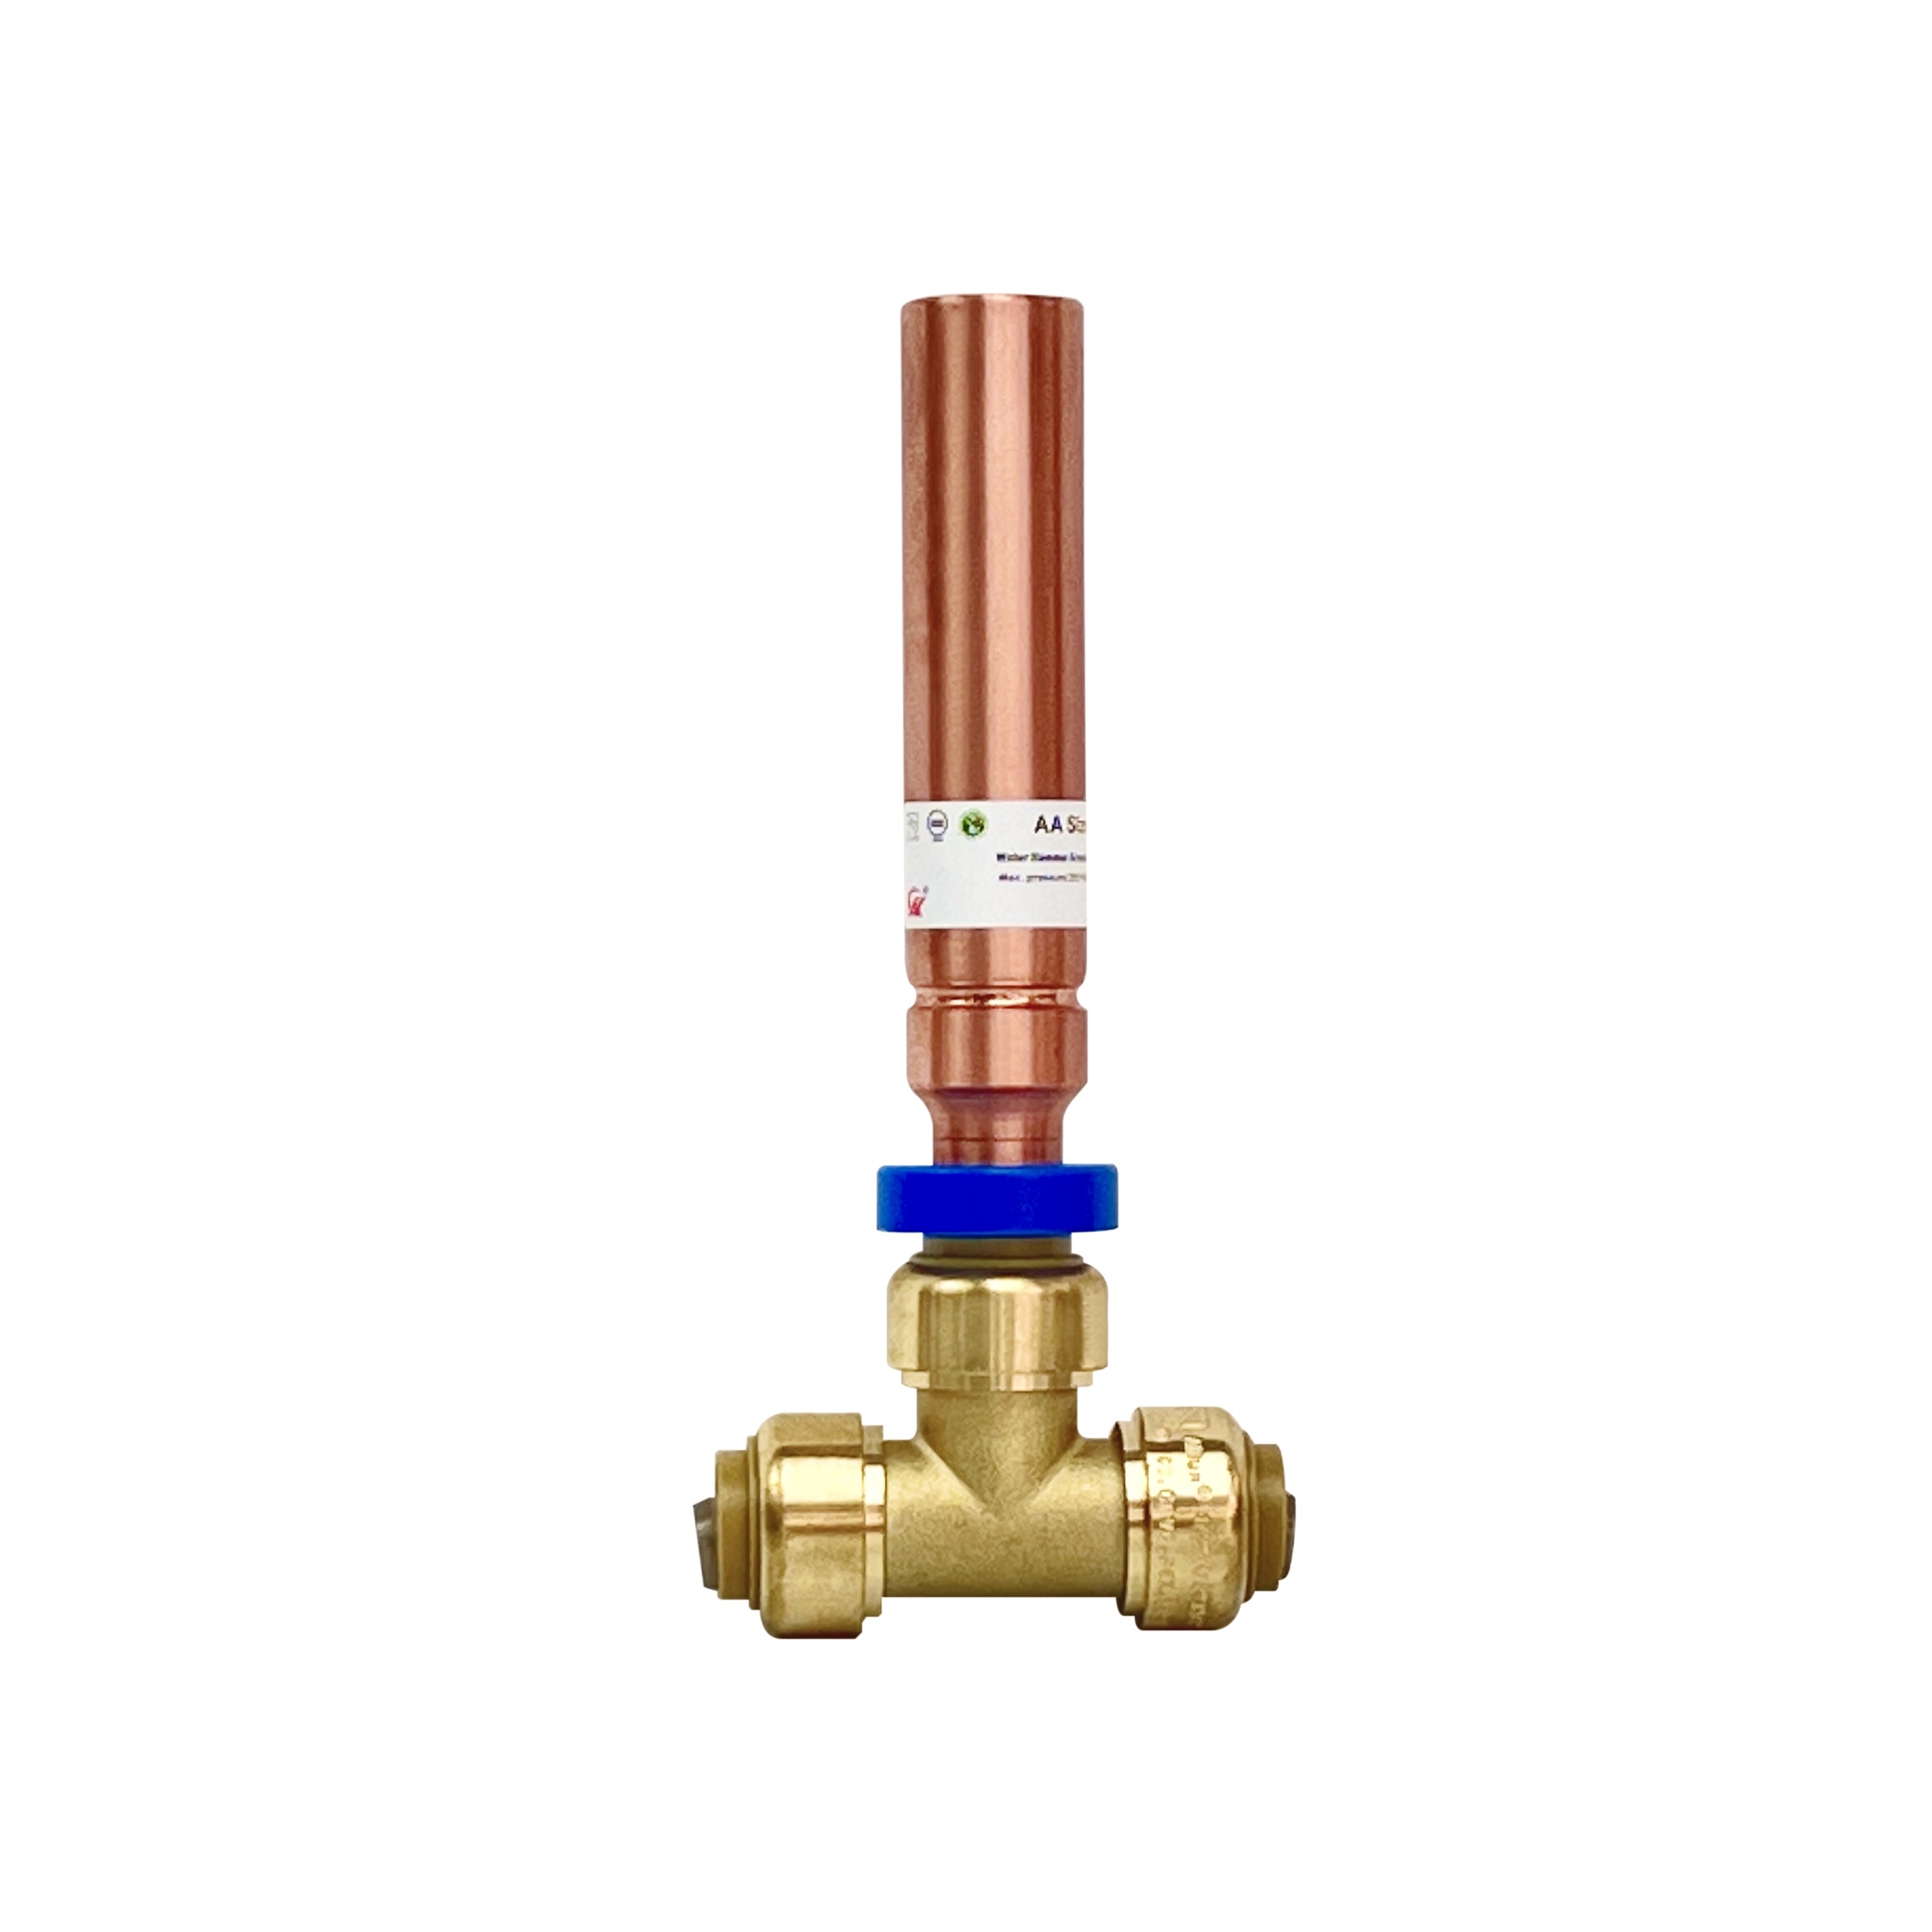 AA Size Copper Water Hammer Arrester (AII Copper) with 1/2" Pushfit Tee Lead Free